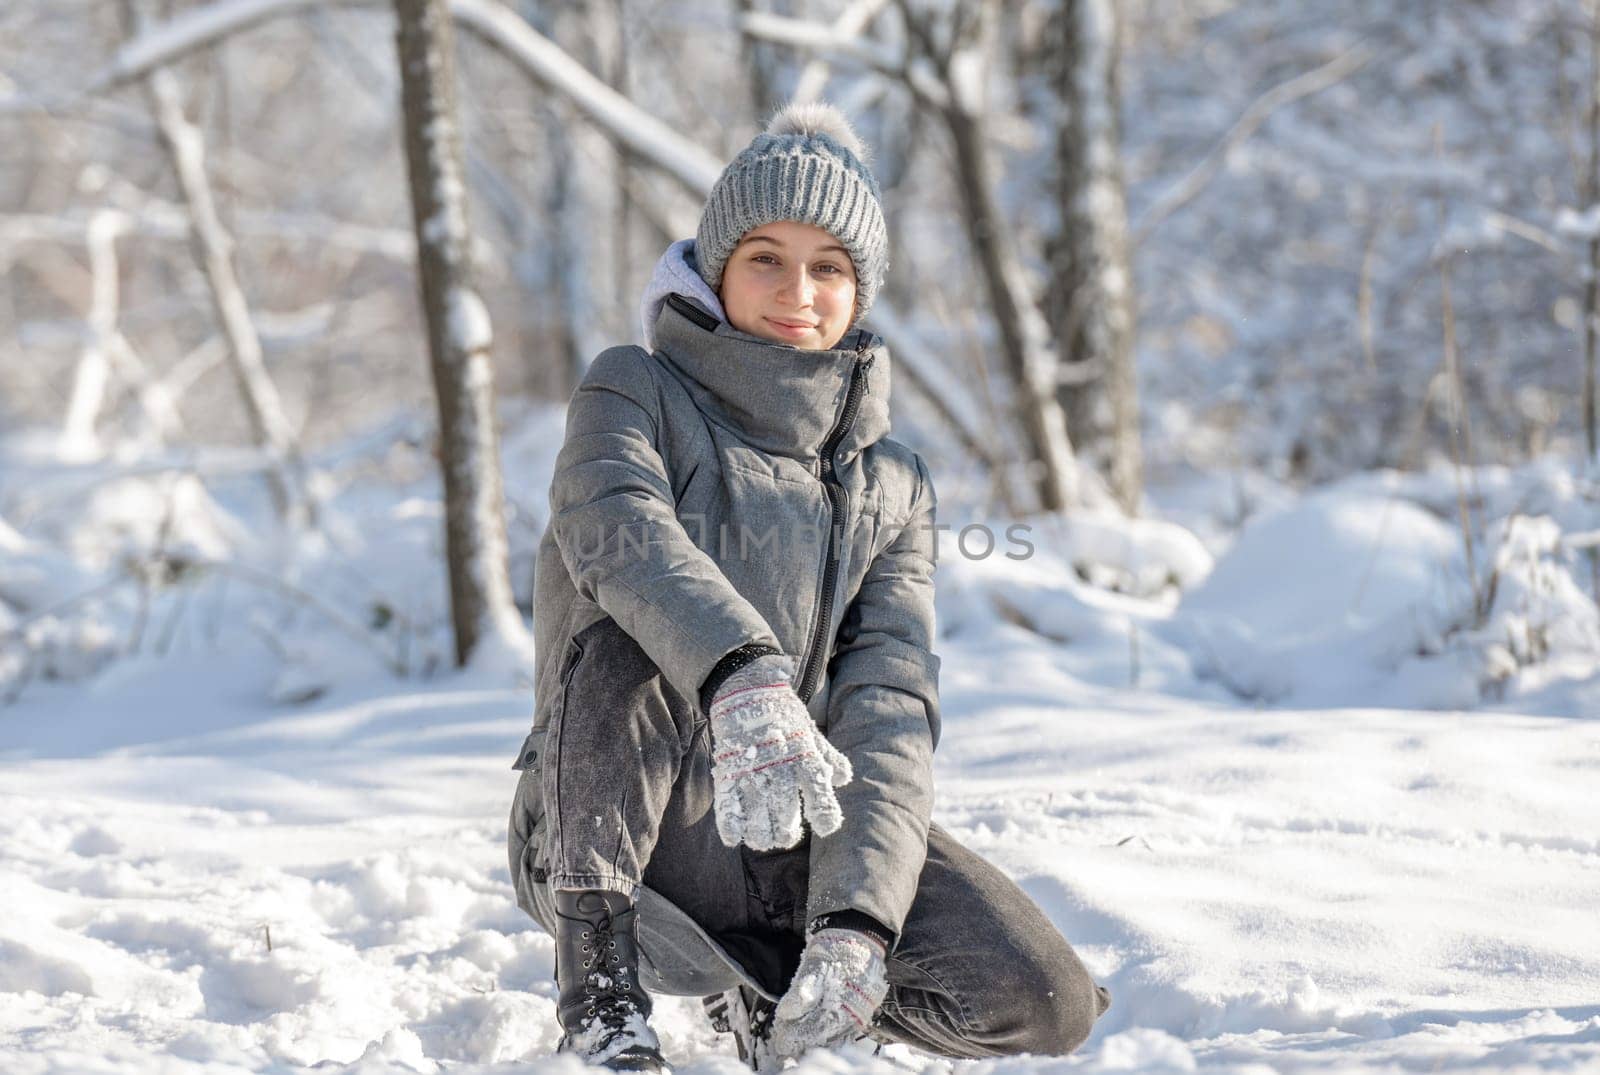 Teenage Girl Sits And Poses For A Photo In A Snow-Covered Forest In Winter